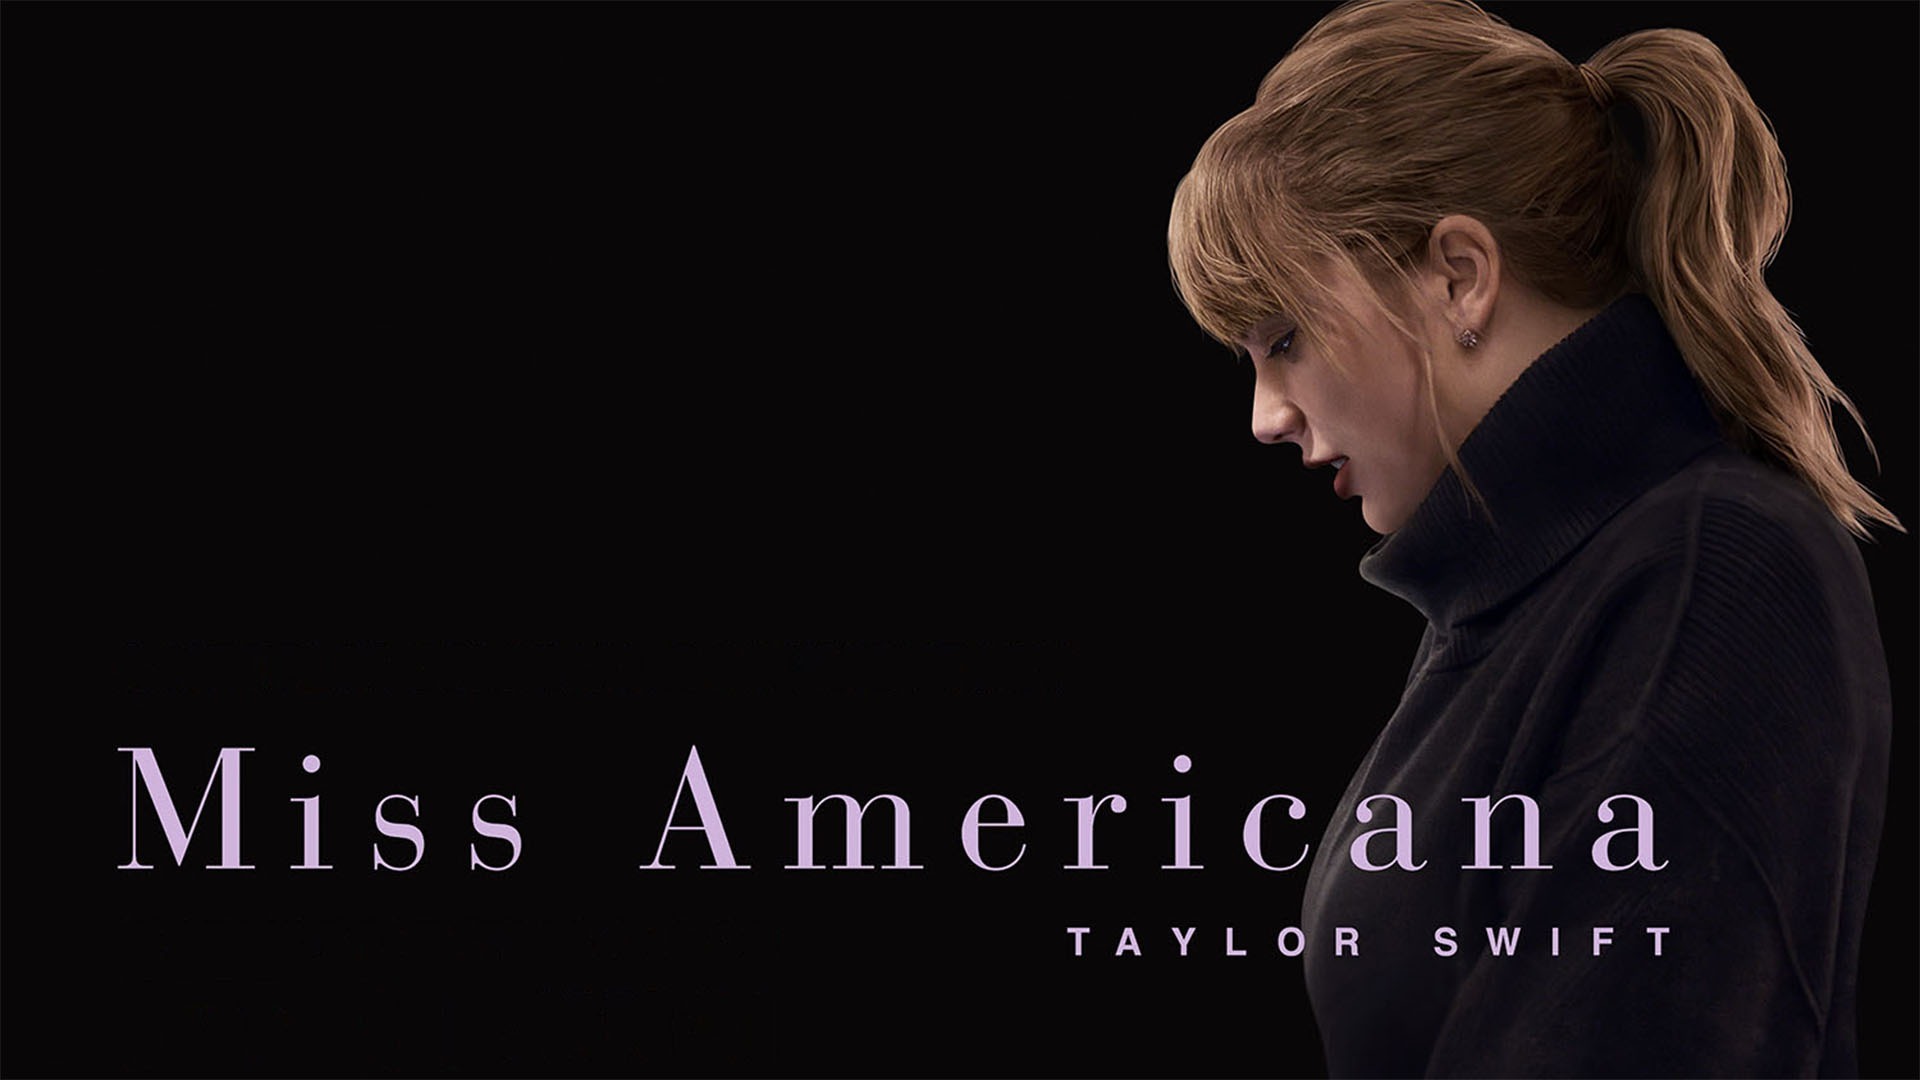 Taylor Swift Miss Americana Trailer 1 Trailers And Videos Rotten Tomatoes